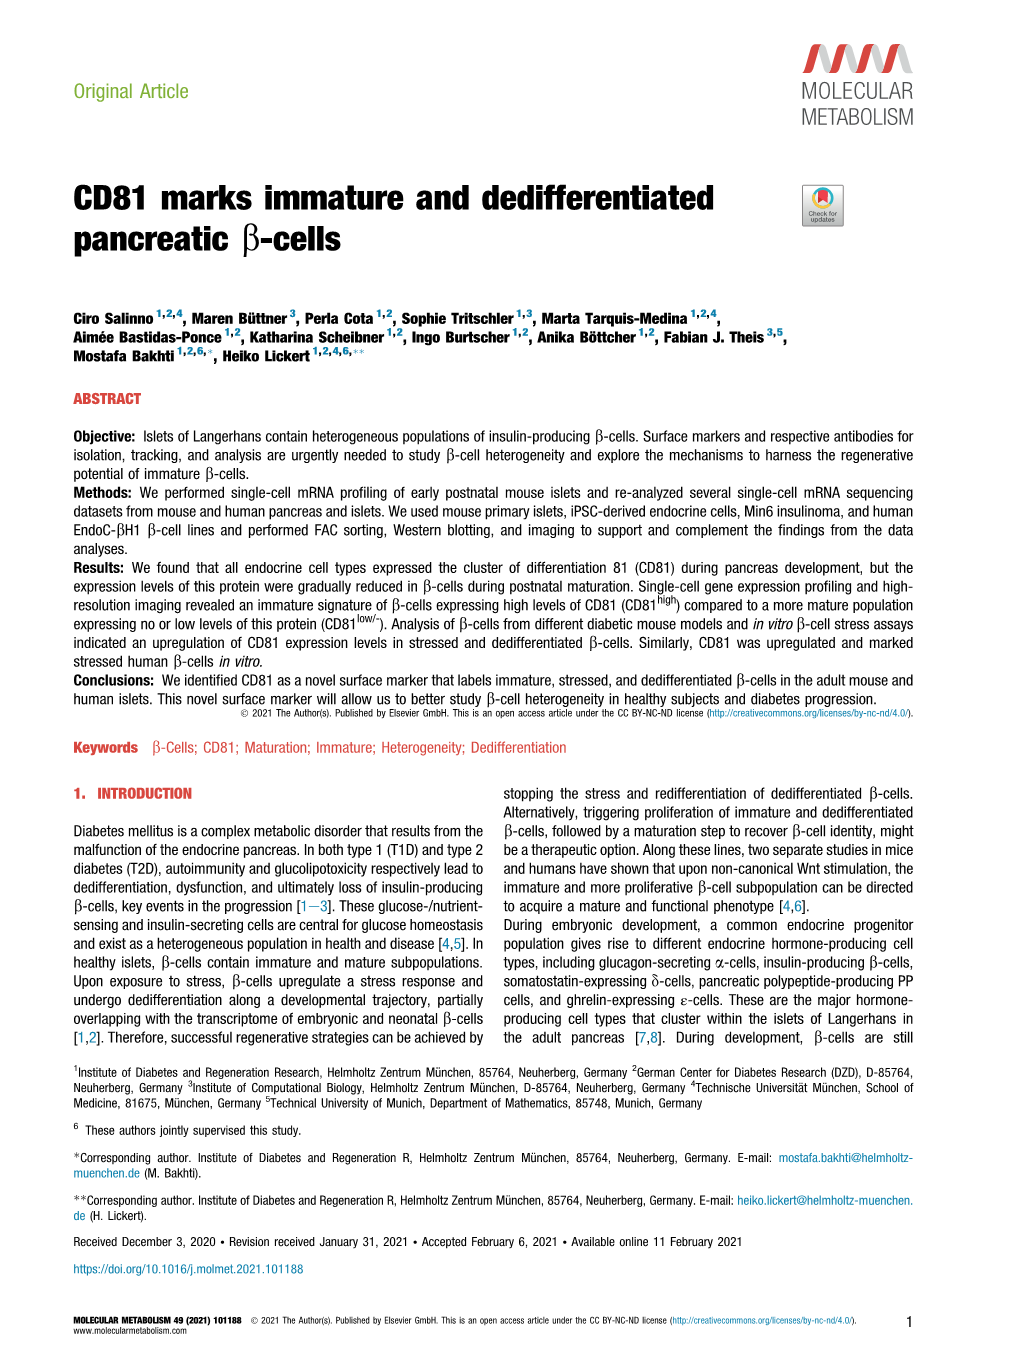 CD81 Marks Immature and Dedifferentiated Pancreatic &Beta